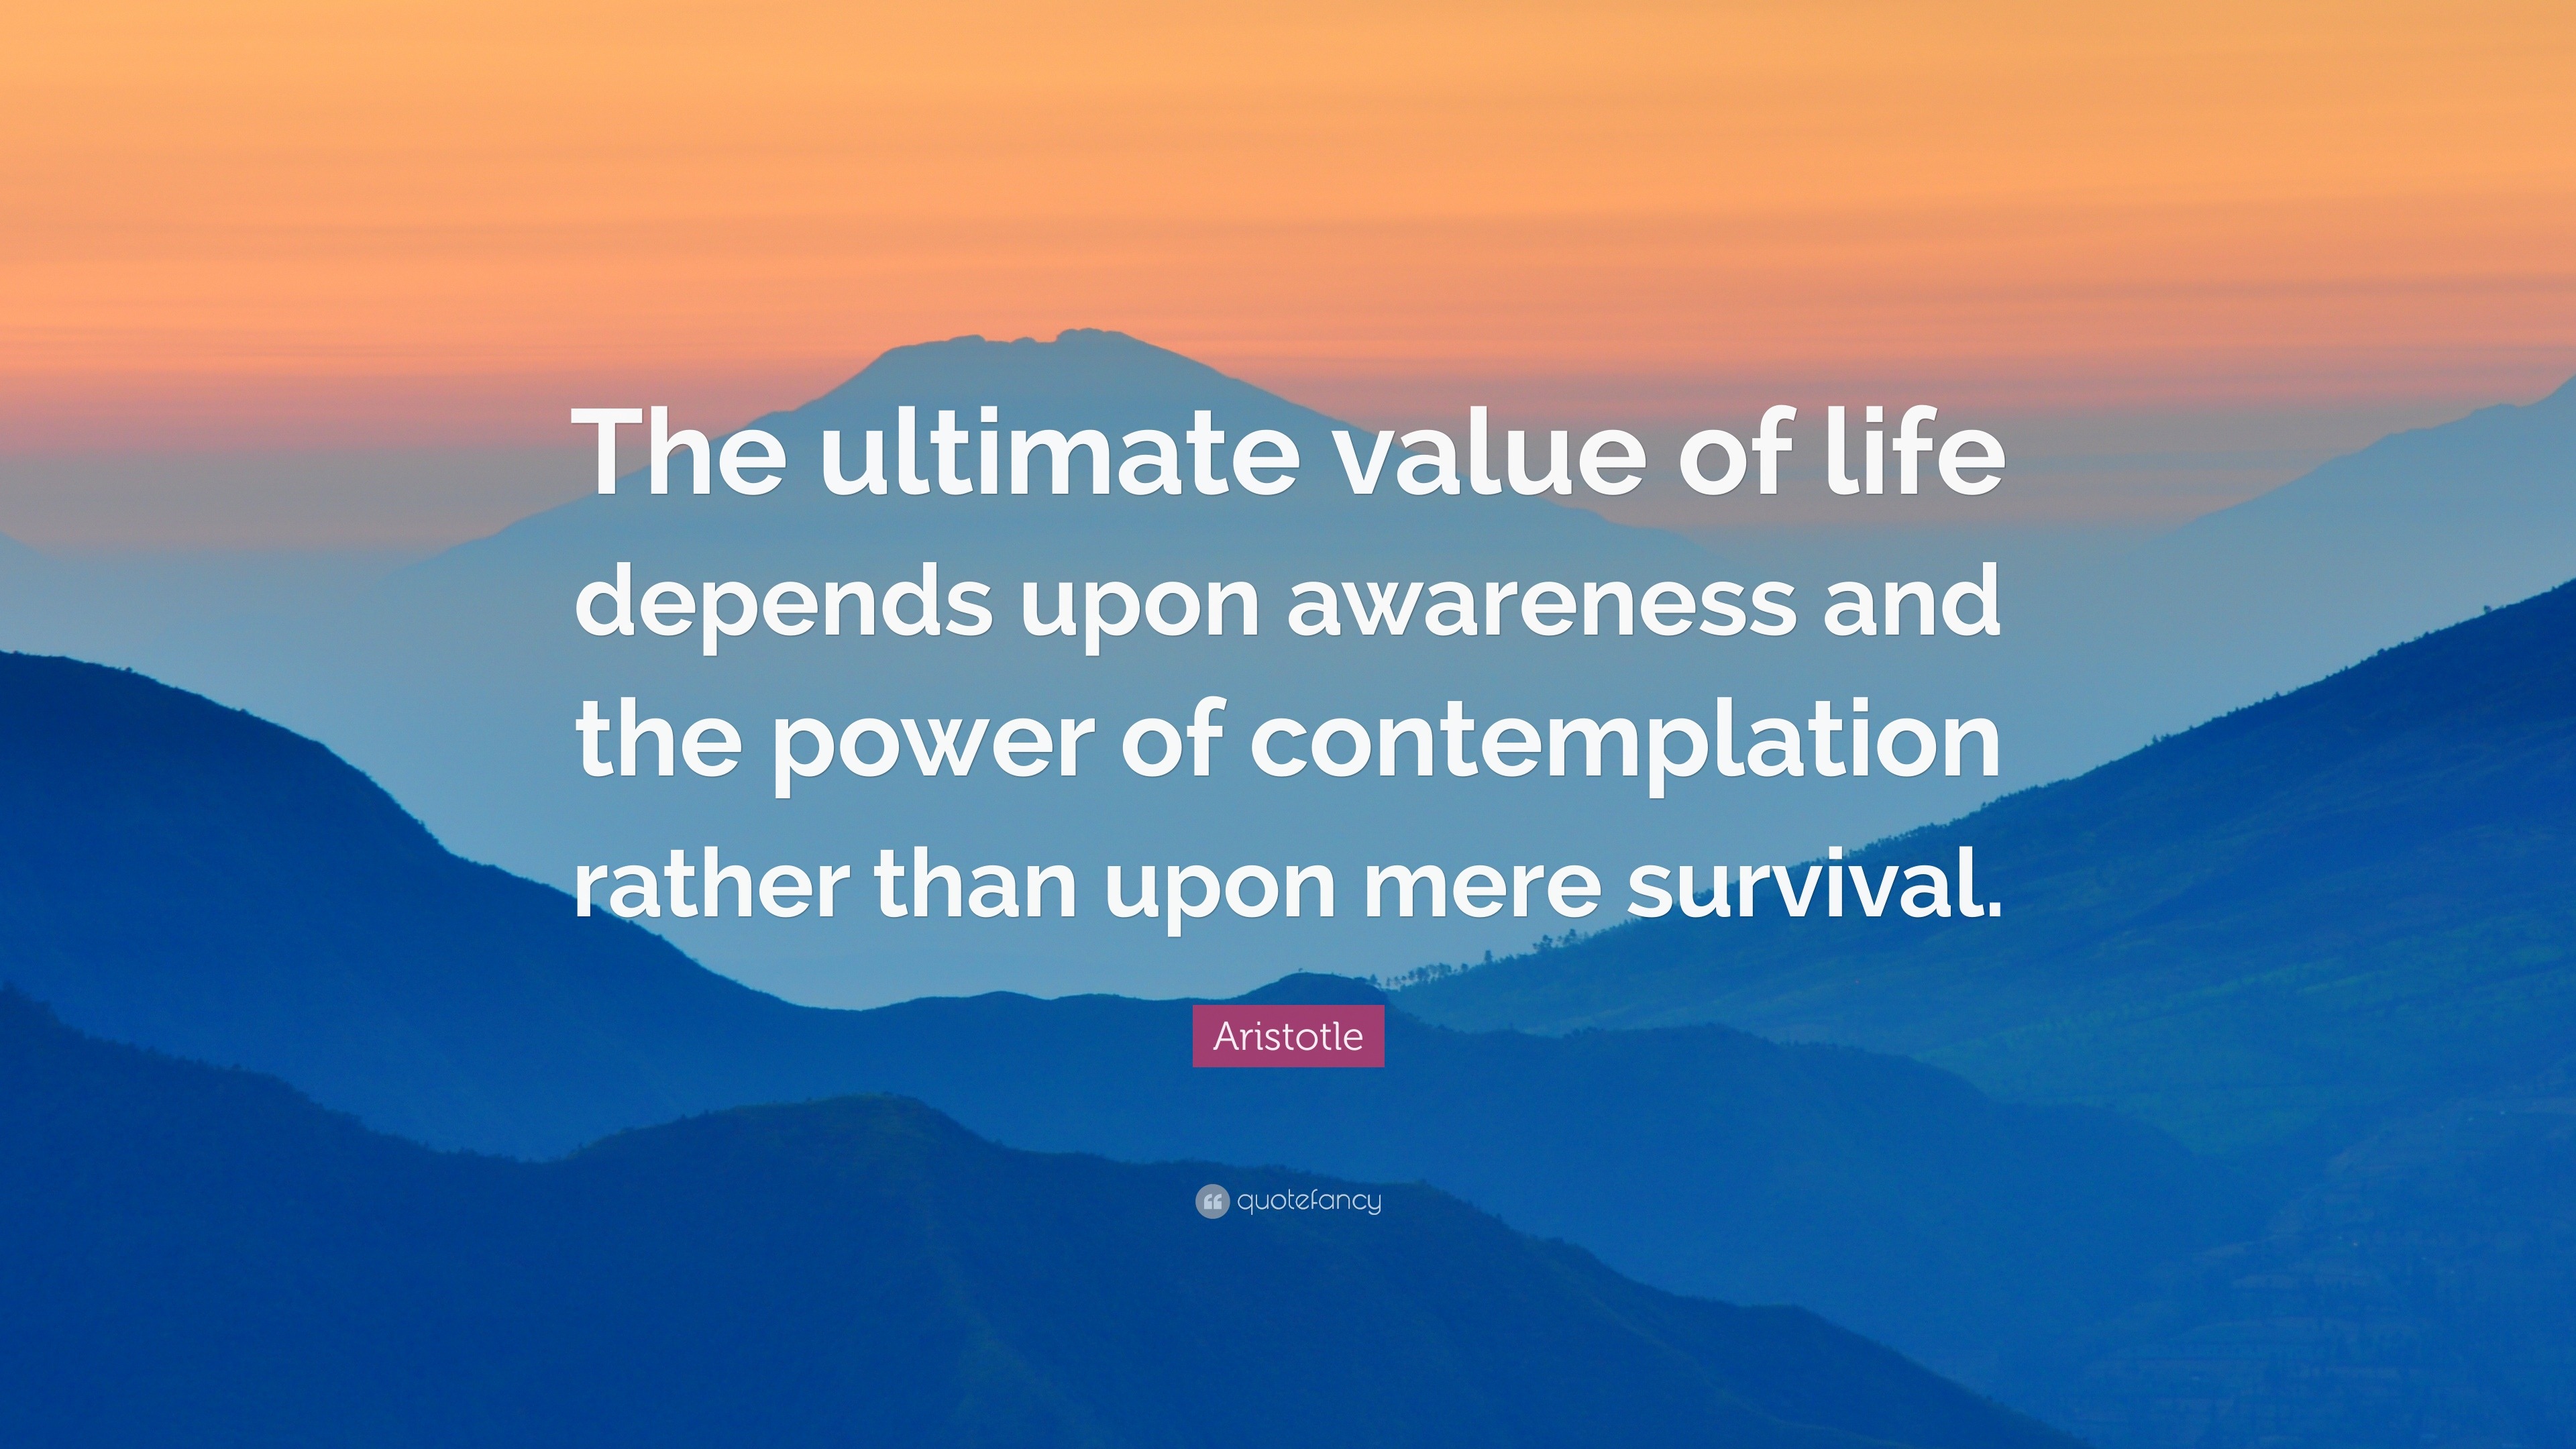 Aristotle Quote: “The ultimate value of life depends upon awareness and